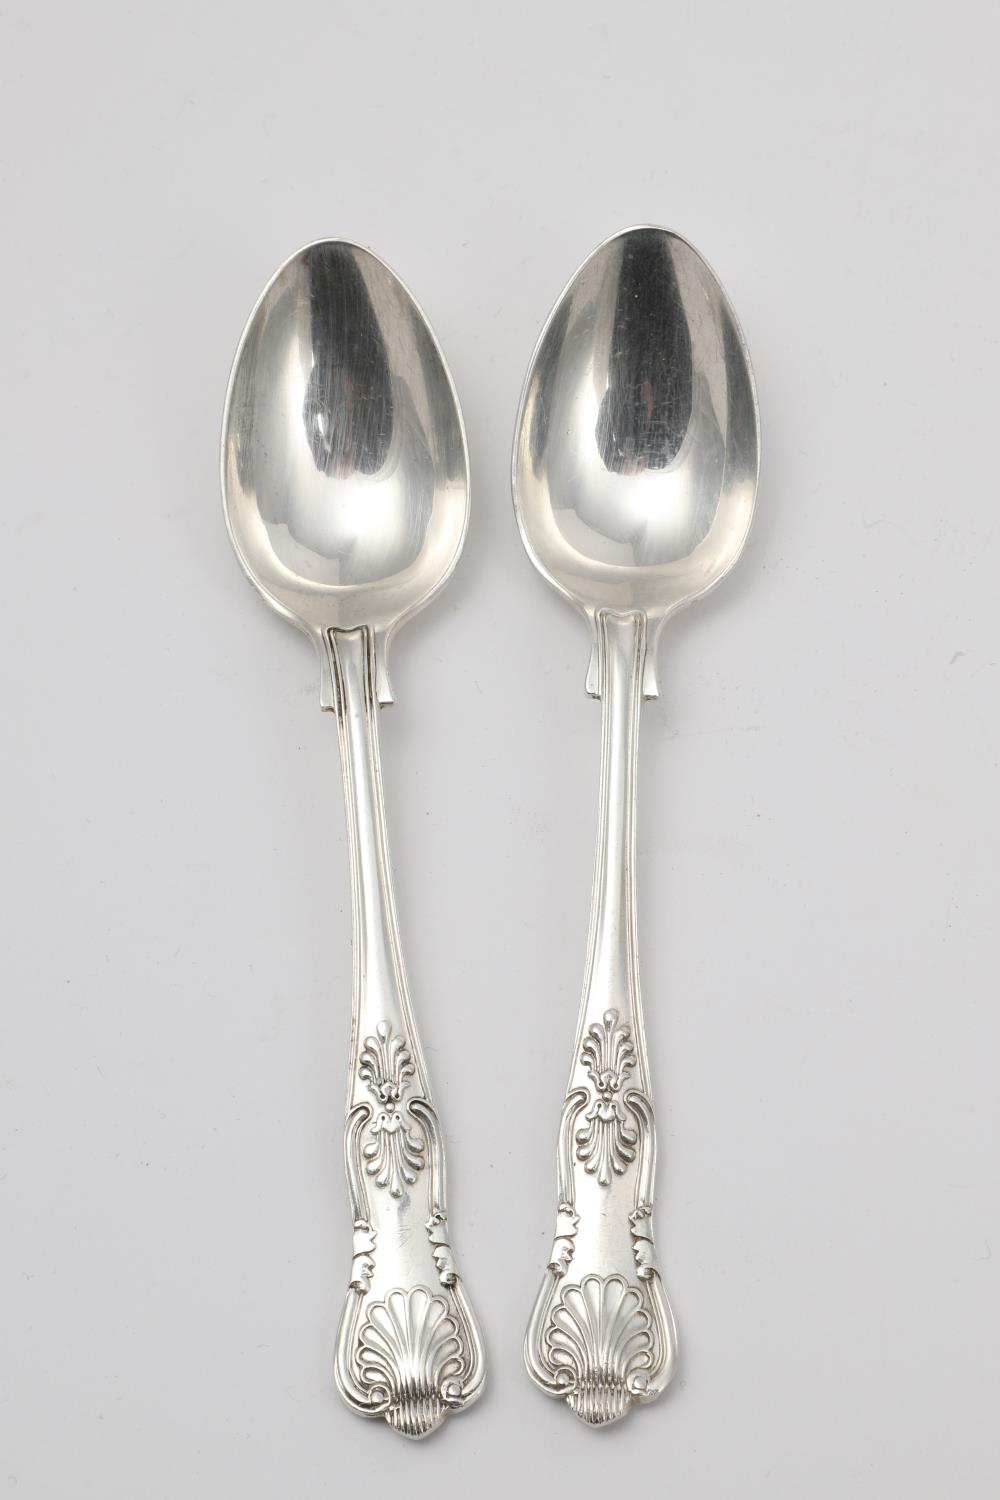 MIXED KING'S PATTERN FLATWARE:-. - Image 10 of 15